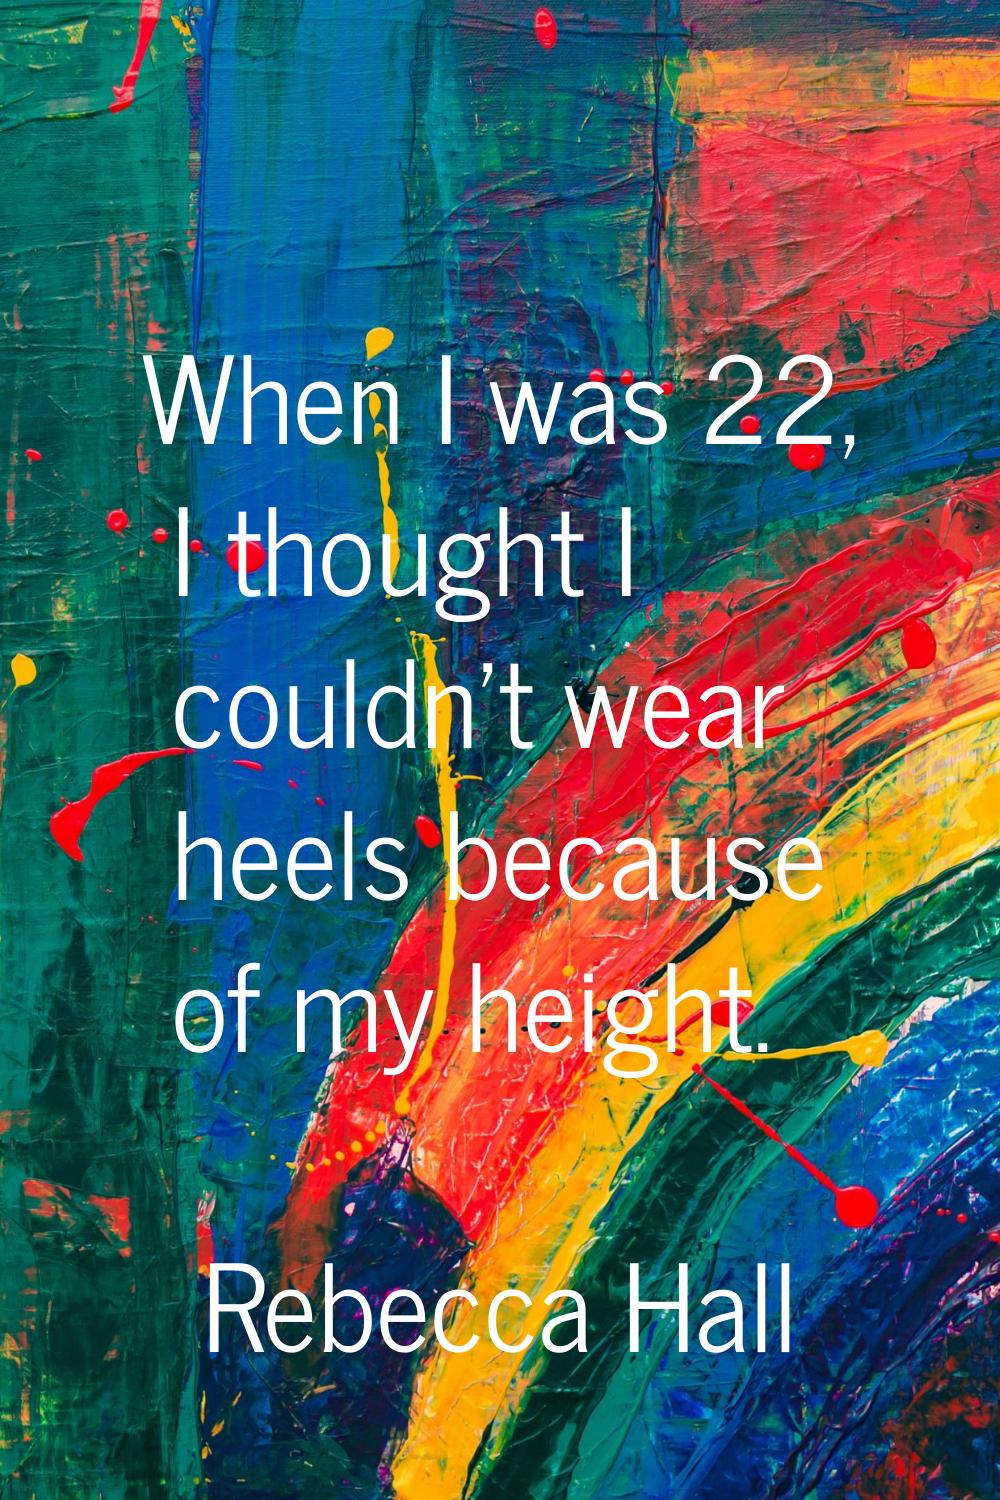 When I was 22, I thought I couldn't wear heels because of my height.